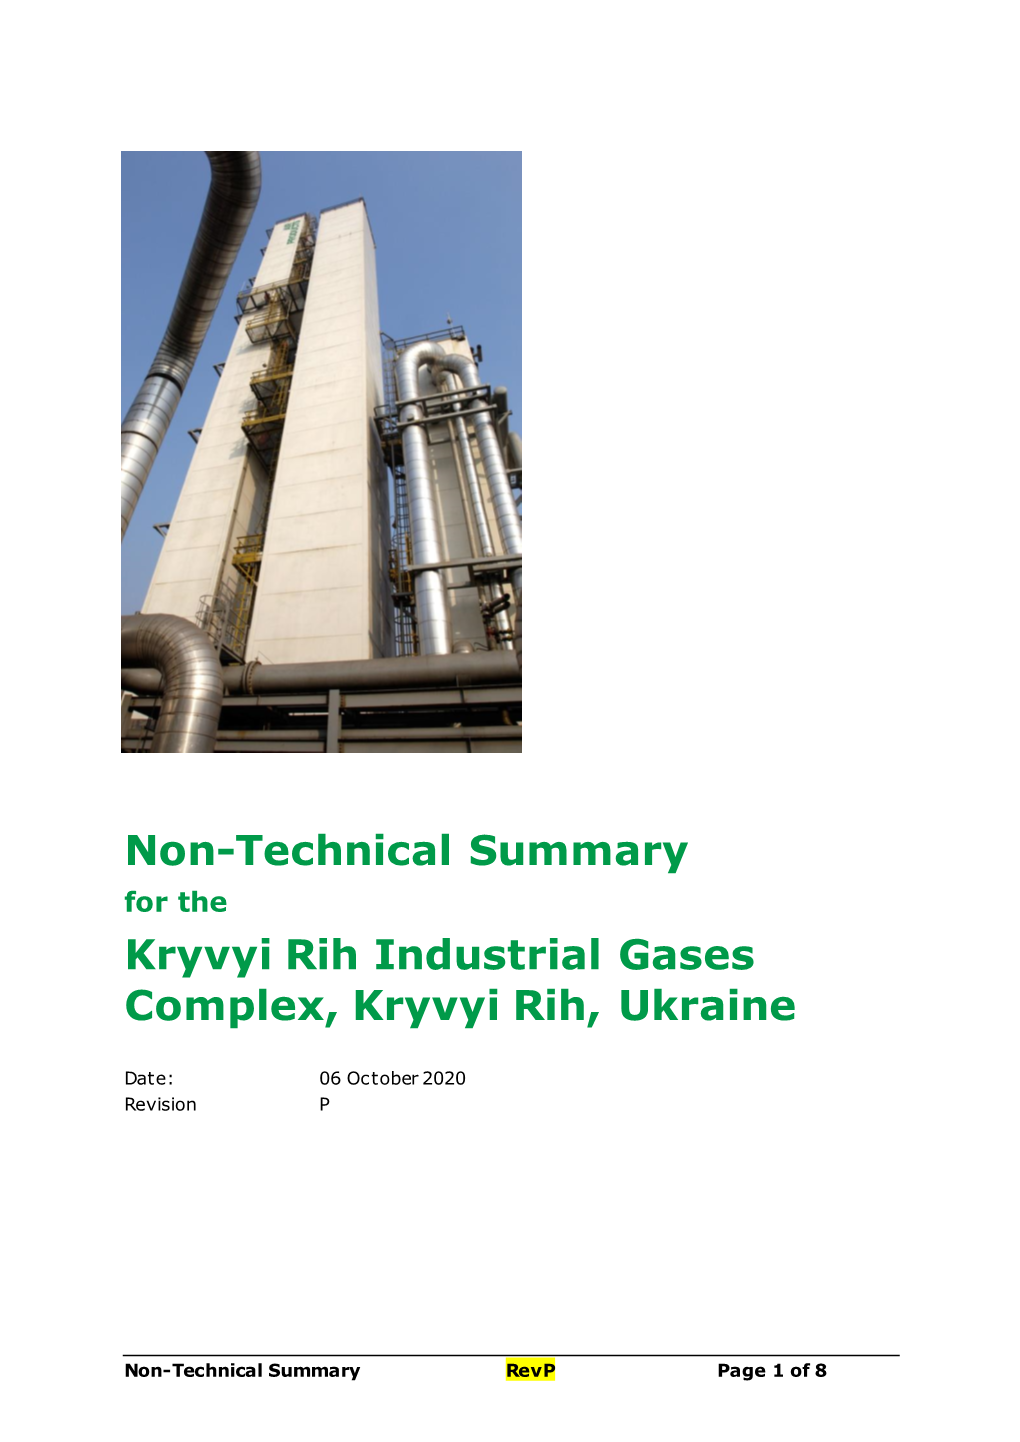 Non-Technical Summary for the Kryvyi Rih Industrial Gases Complex, Kryvyi Rih, Ukraine